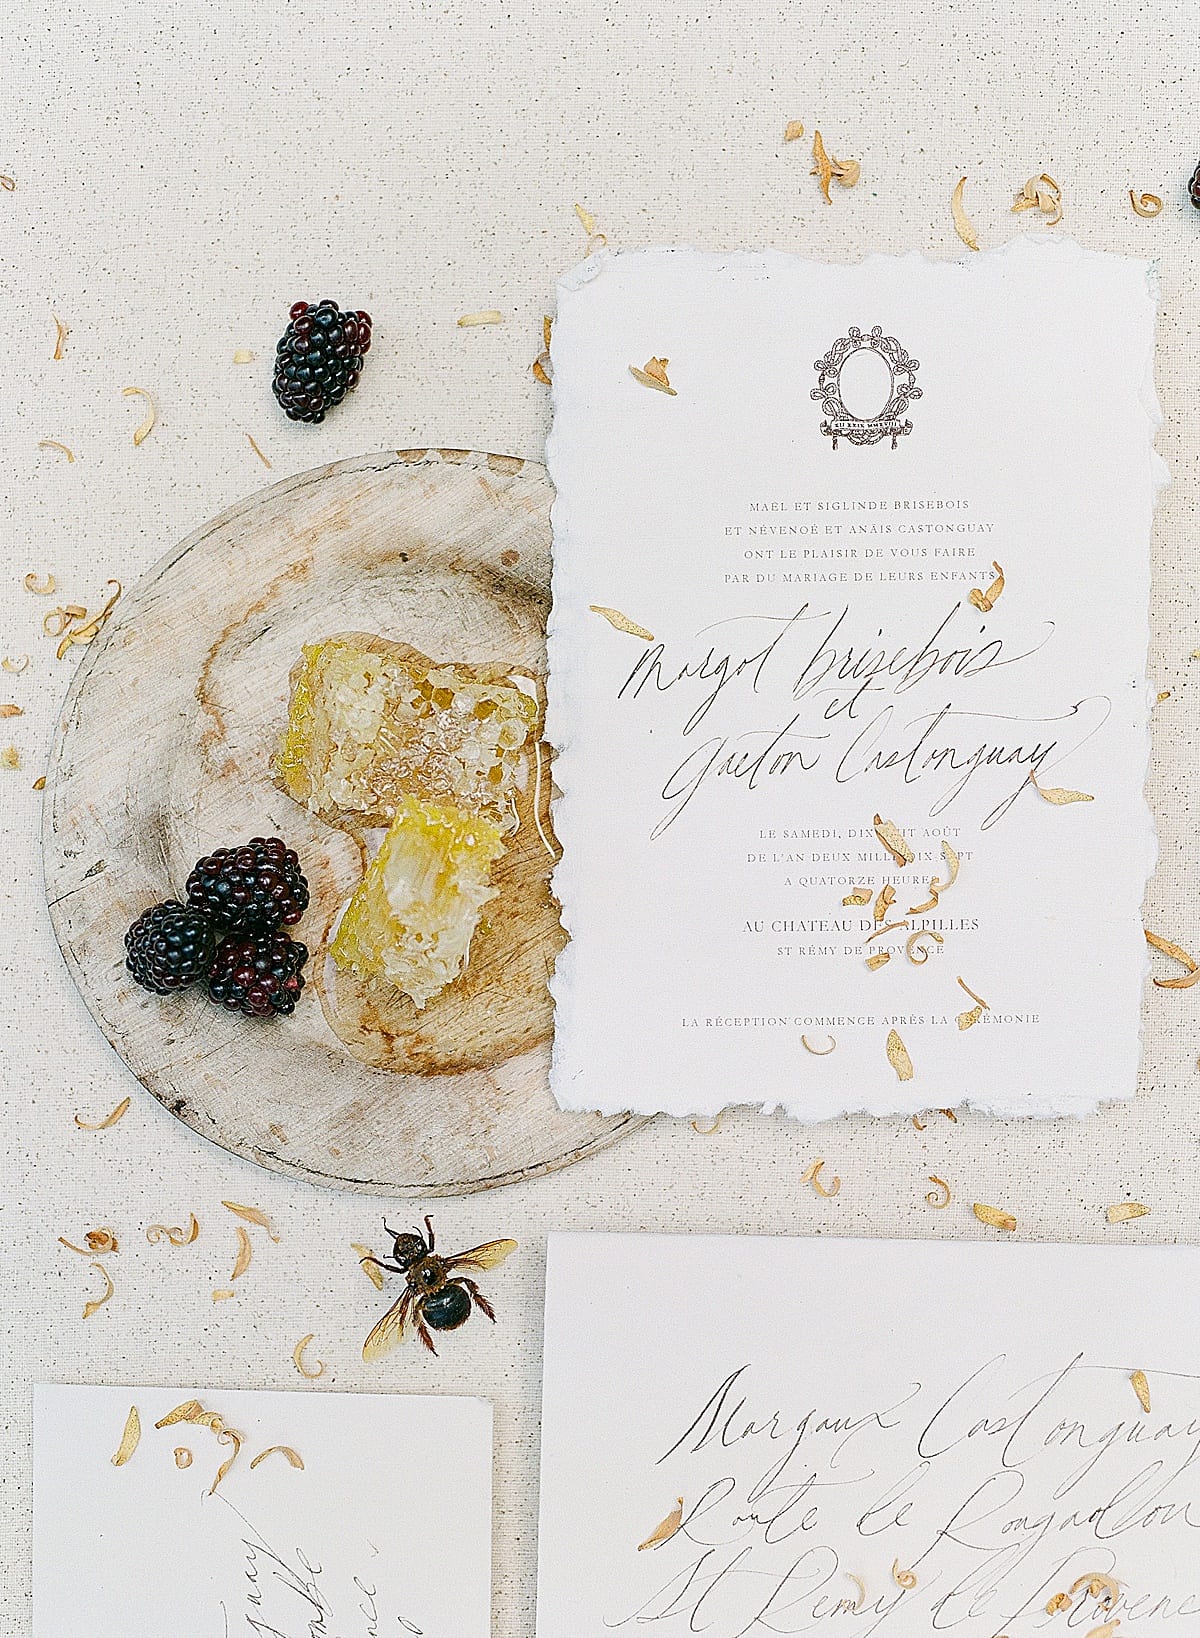 Invitation Suite with plate of honey and blue berries photo